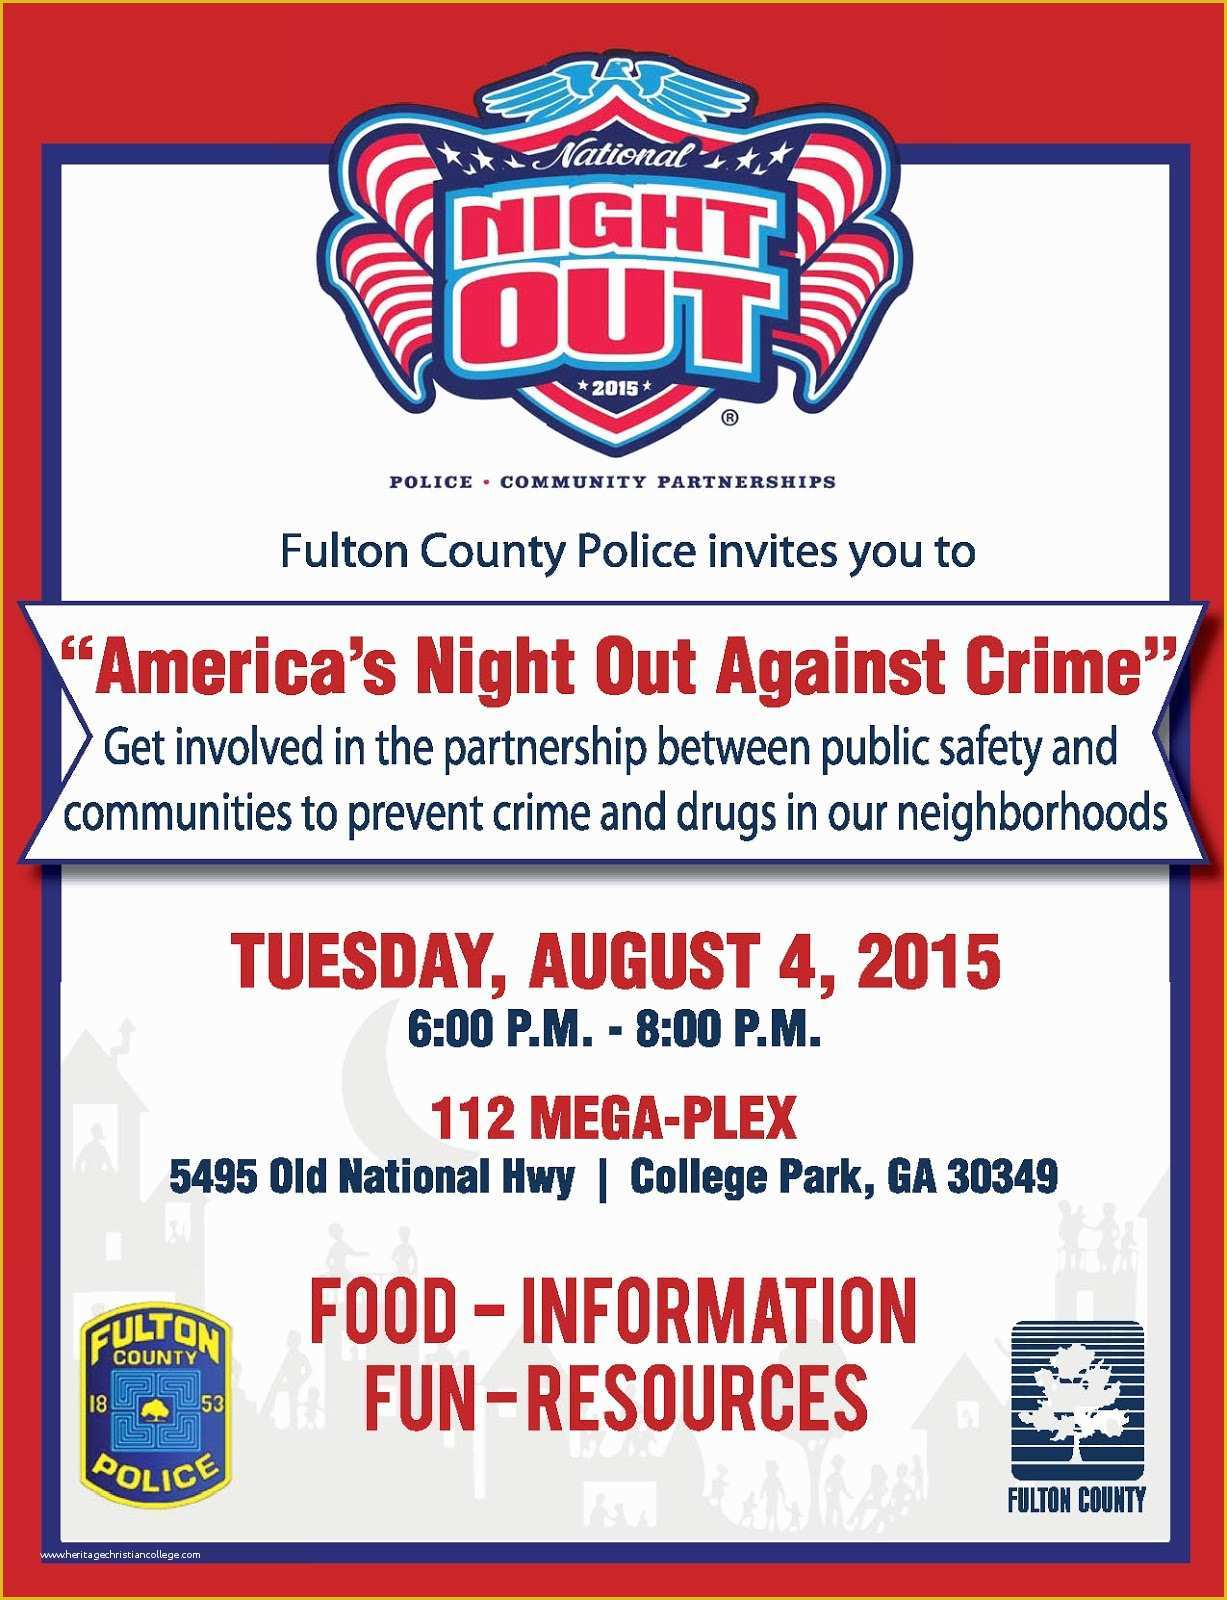 National Night Out Flyer Template Free Of National Night Out Flyers Samples to Pin On